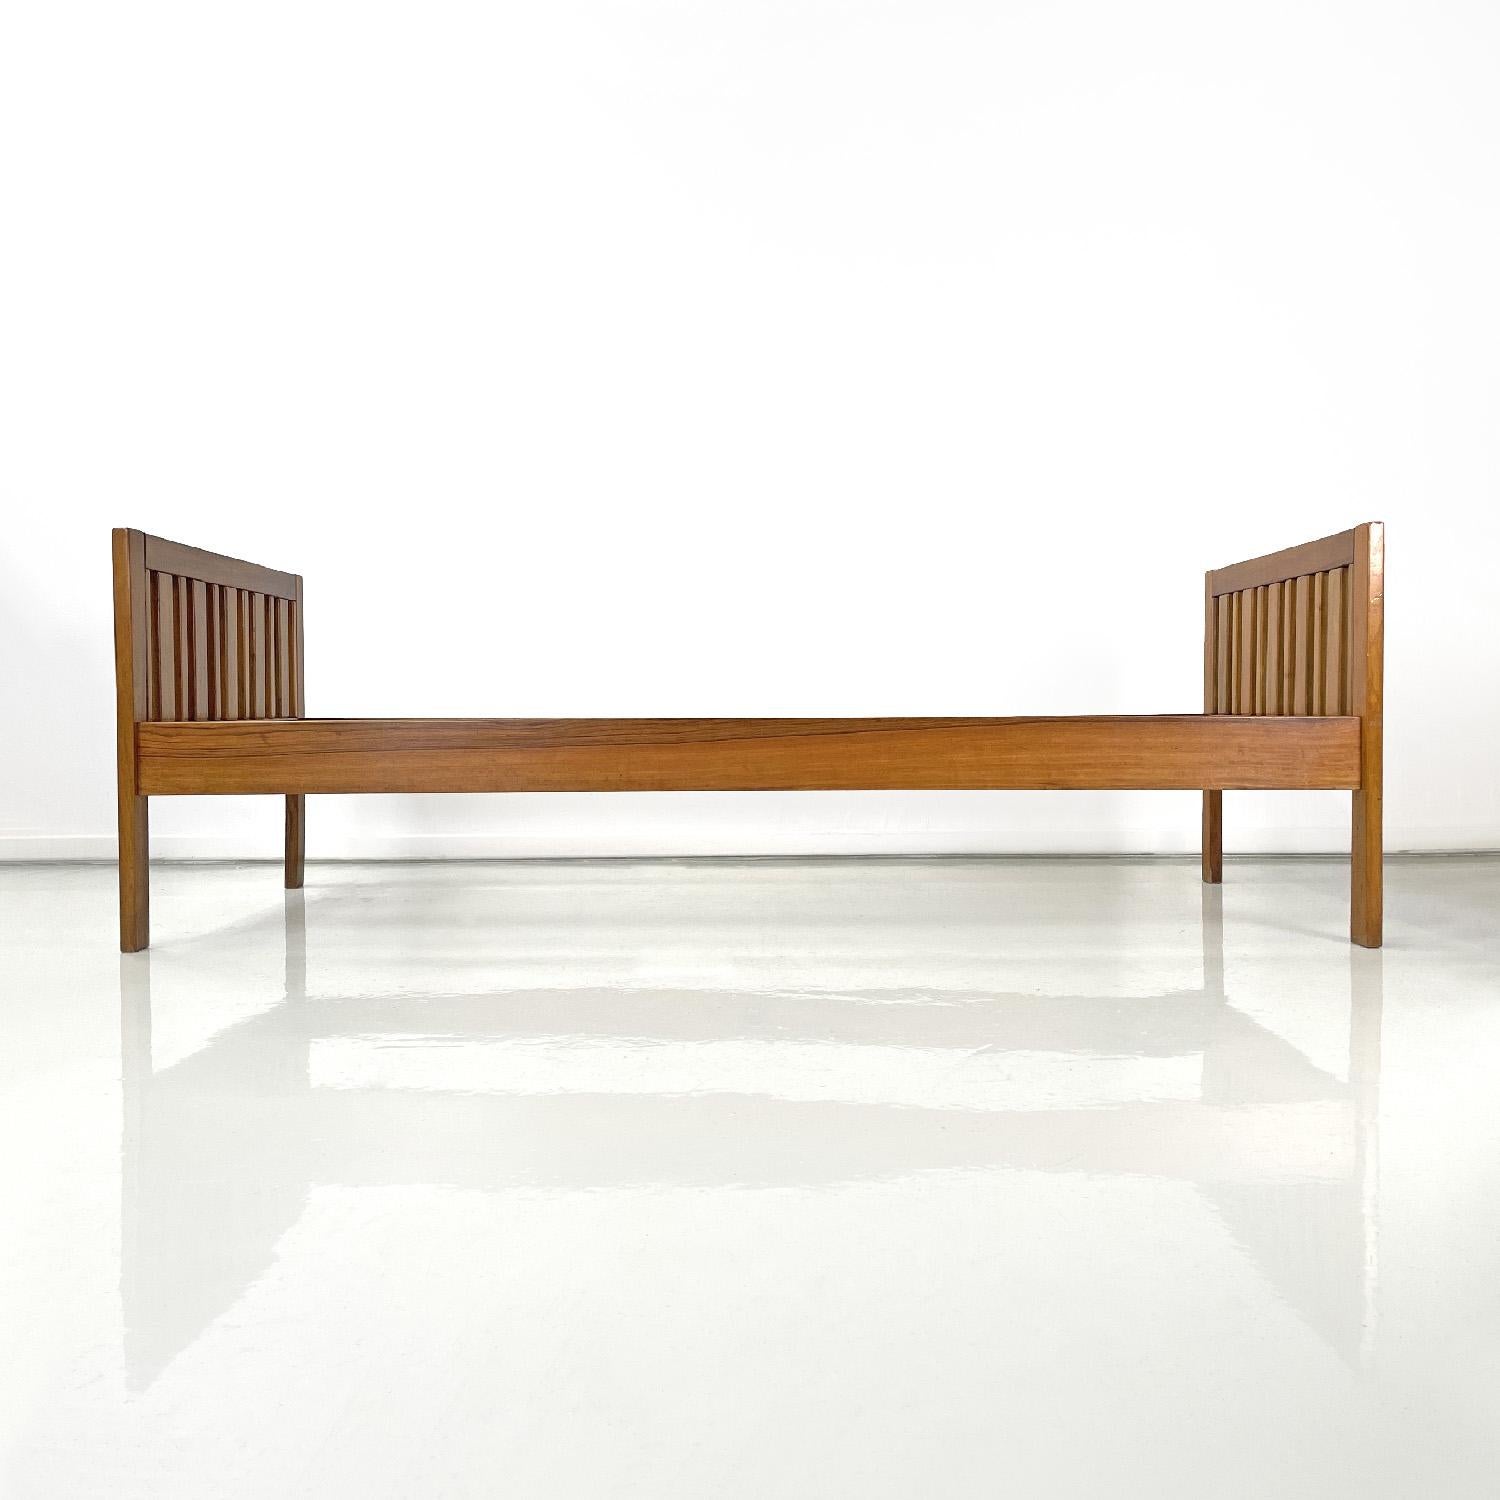 Mid-20th Century Italian mid-century modern bed by Ettore Sottsass for Poltronova, 1960s For Sale